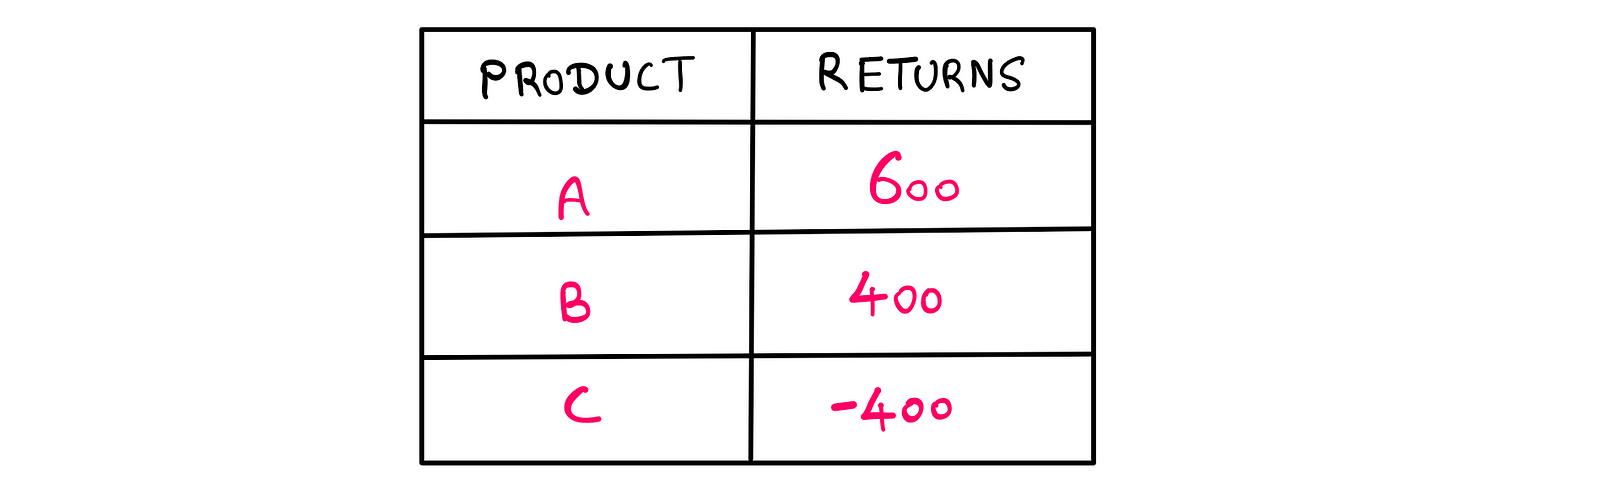 How To Really Treat Percentages With Negative Numbers — A table listing the following information: Product A → Return: 600 ; Product B → Return: 400 ; Product C → Return: -400; Total Return: 600. Below the table the following question is written: “What is A’s contribution to the total return?”